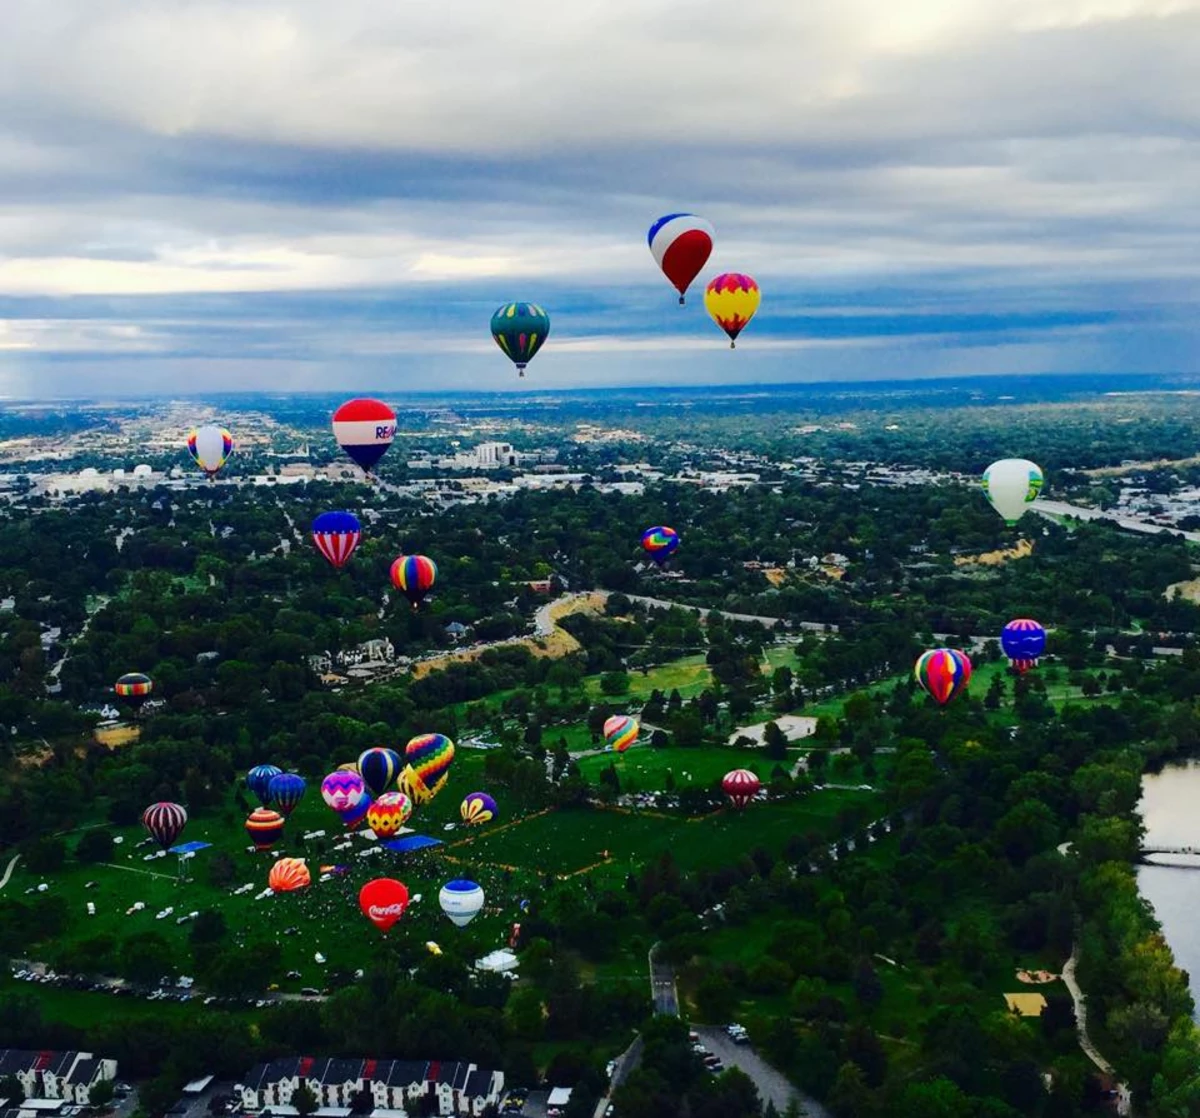 5 Things You Need to Know for the Spirit of Boise Balloon Classic